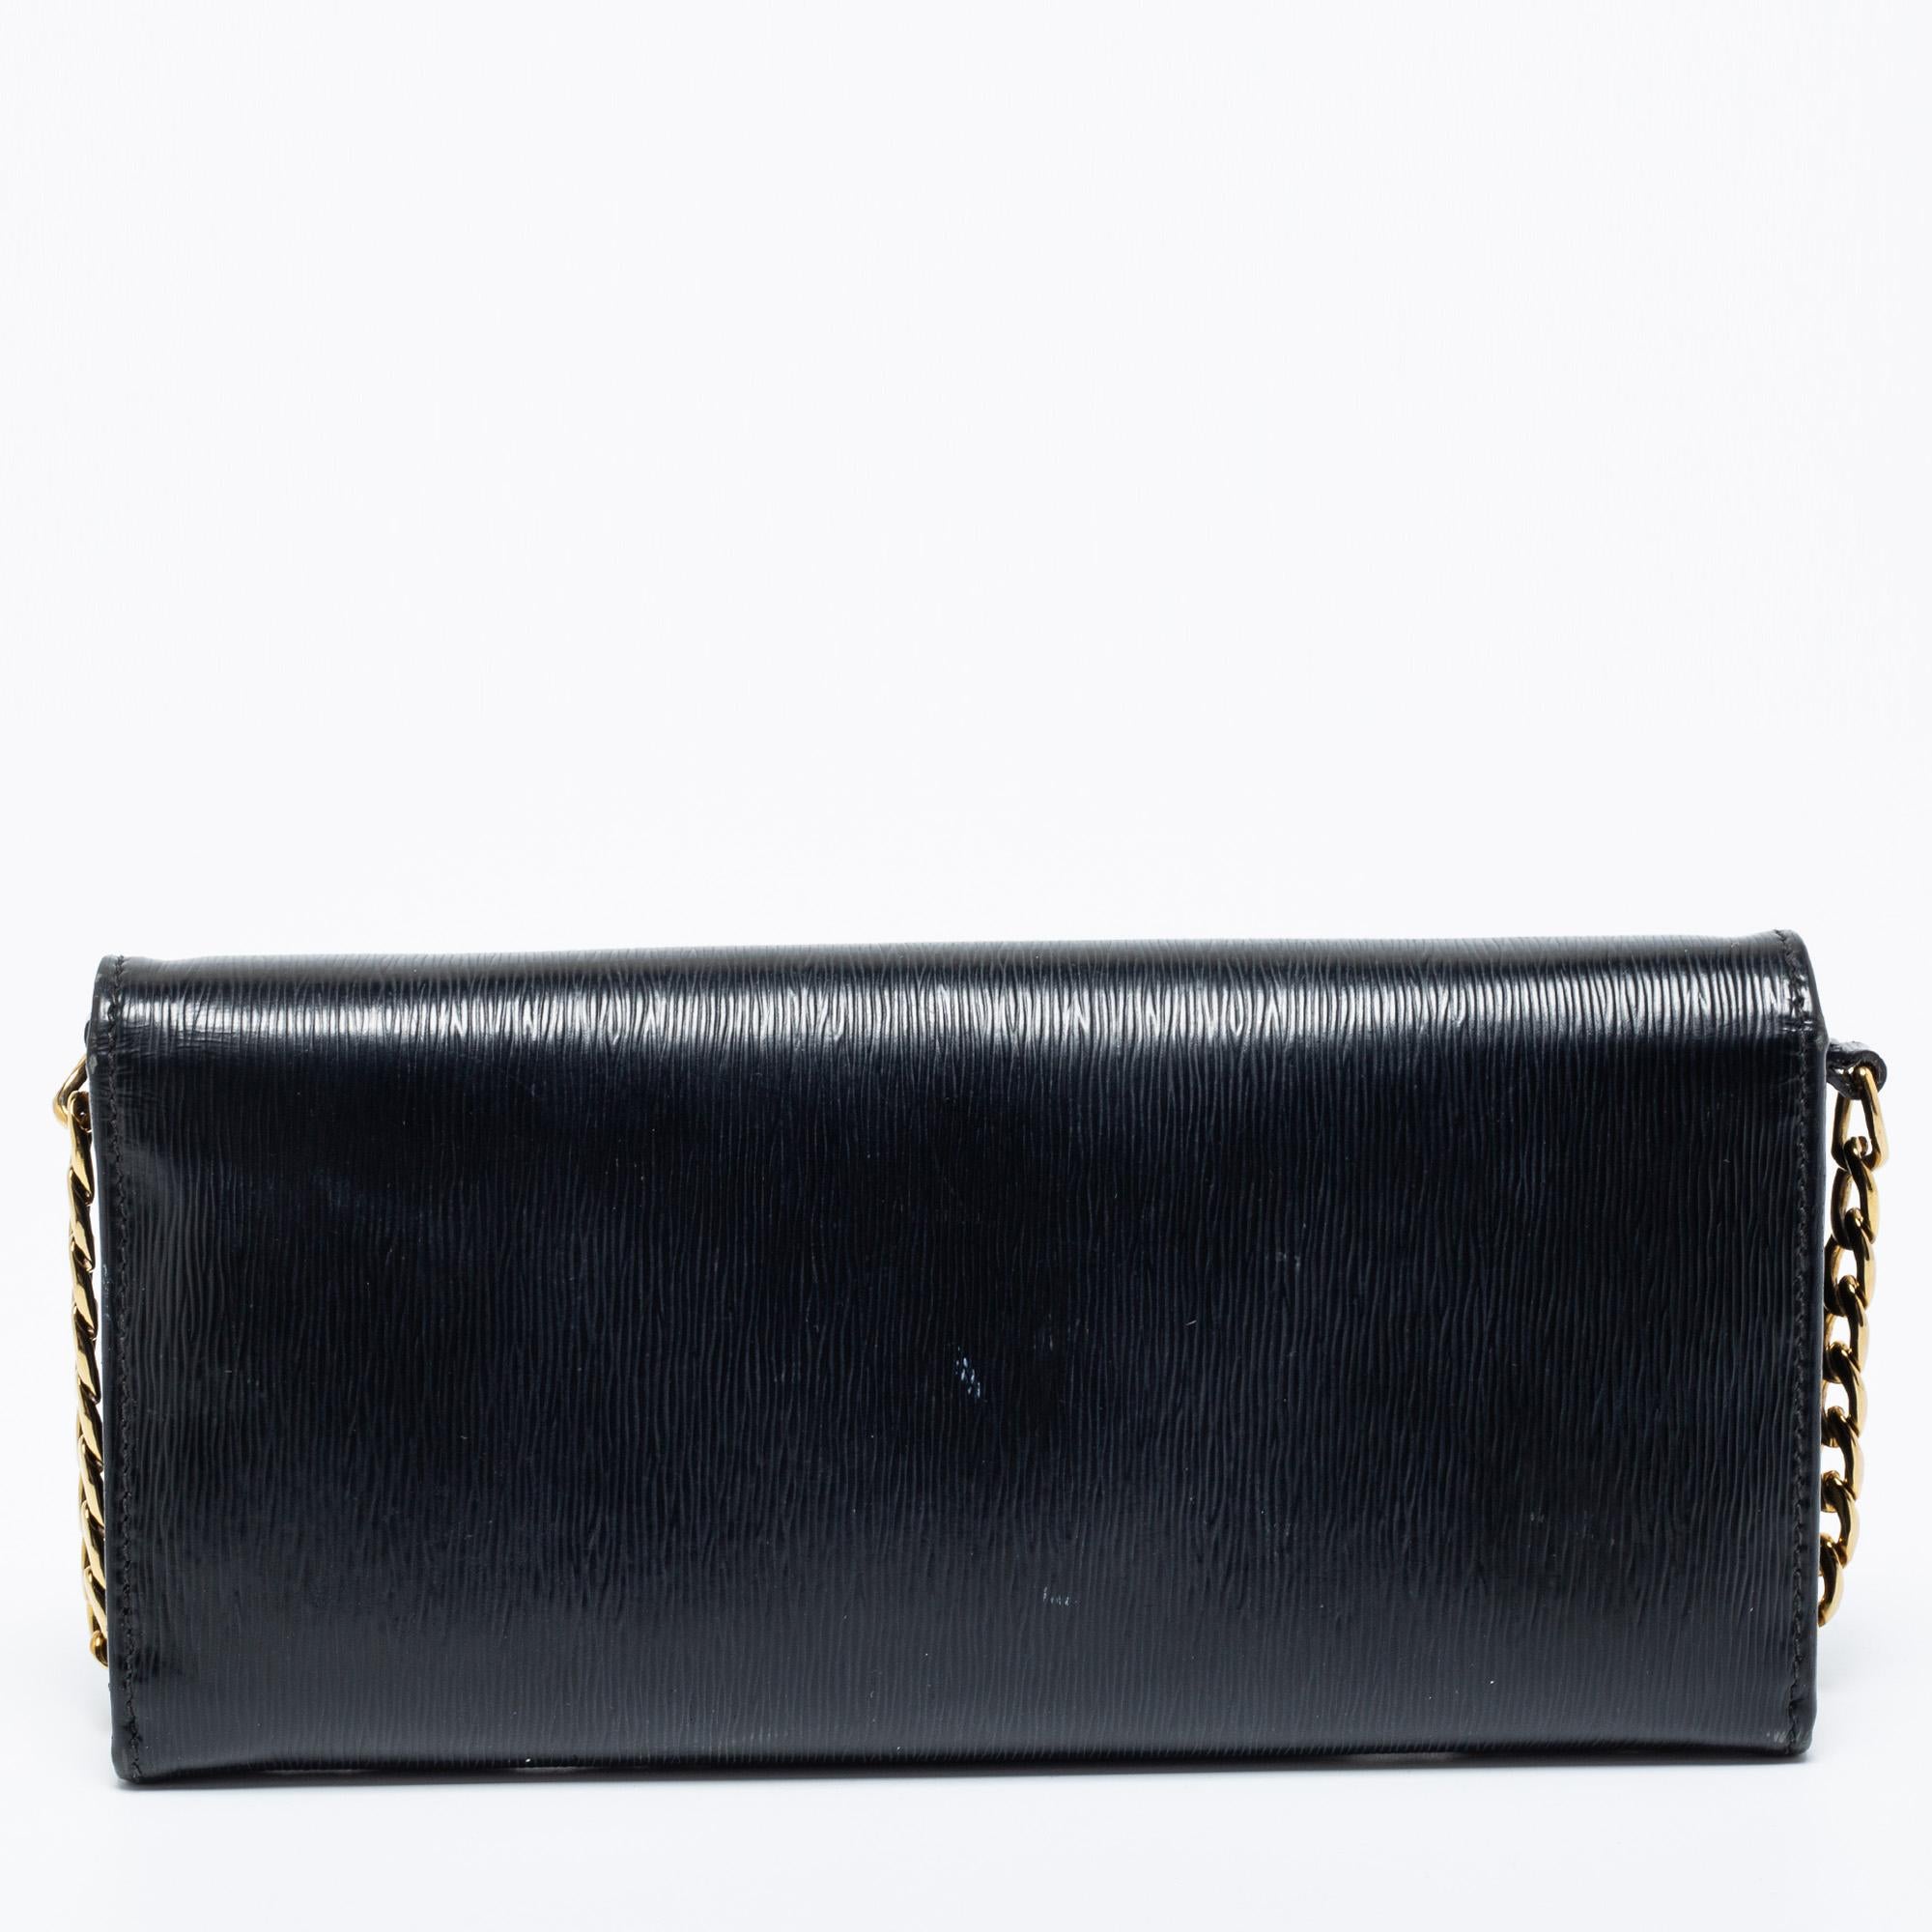 Now here's a creation that is both stylish and functional. Prada brings us this wallet on chain that will make you look glamorous as you carry it! It is made from black Vitello Move leather, with a gold-tone logo accent attached to the front. It is